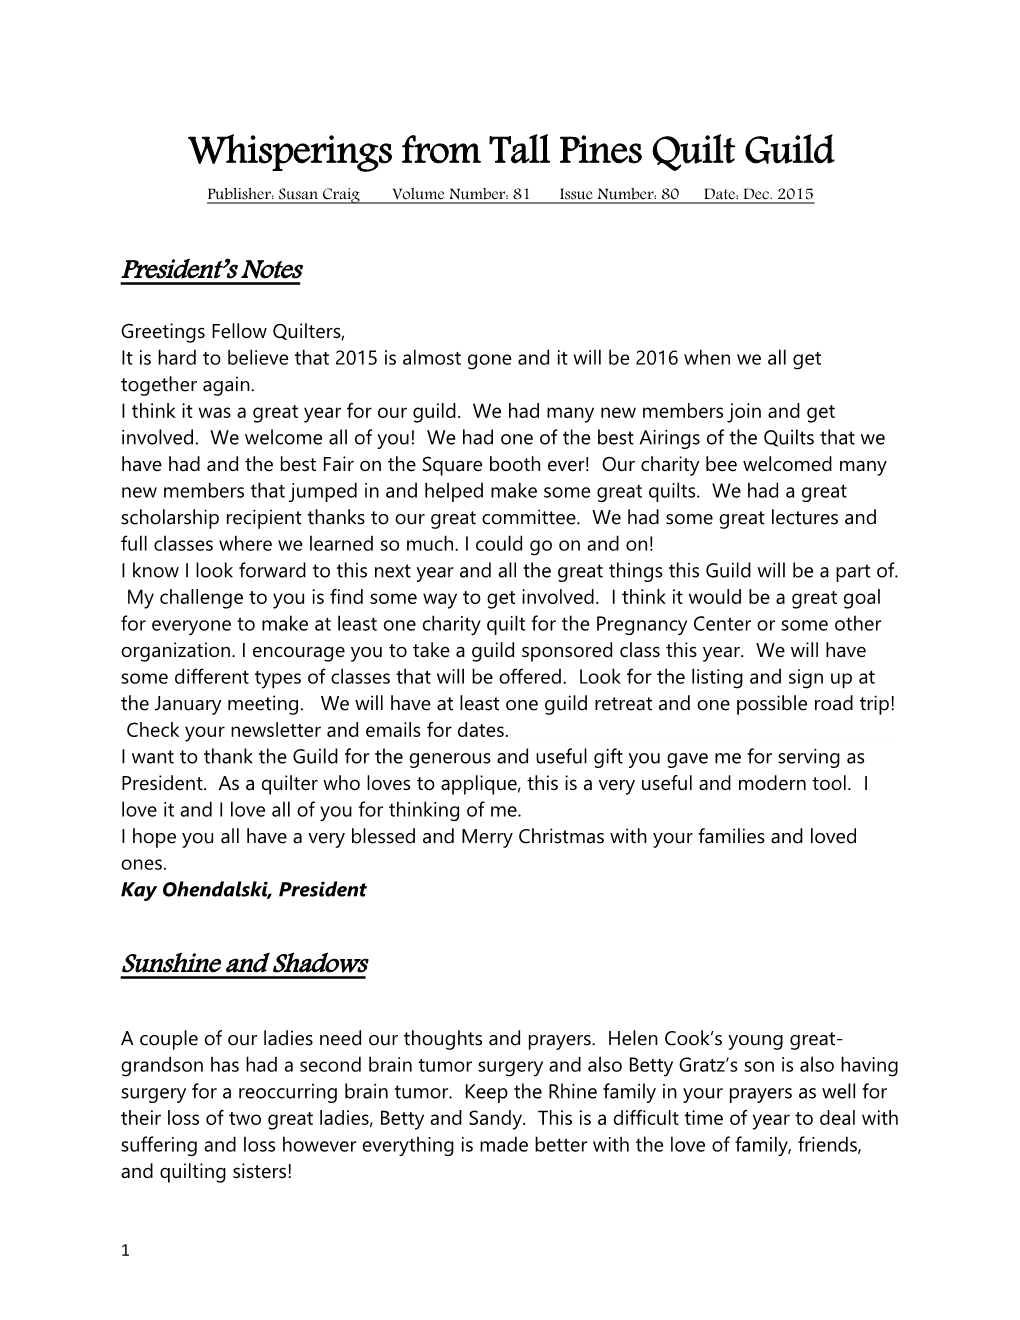 Whisperings from Tall Pines Quilt Guild